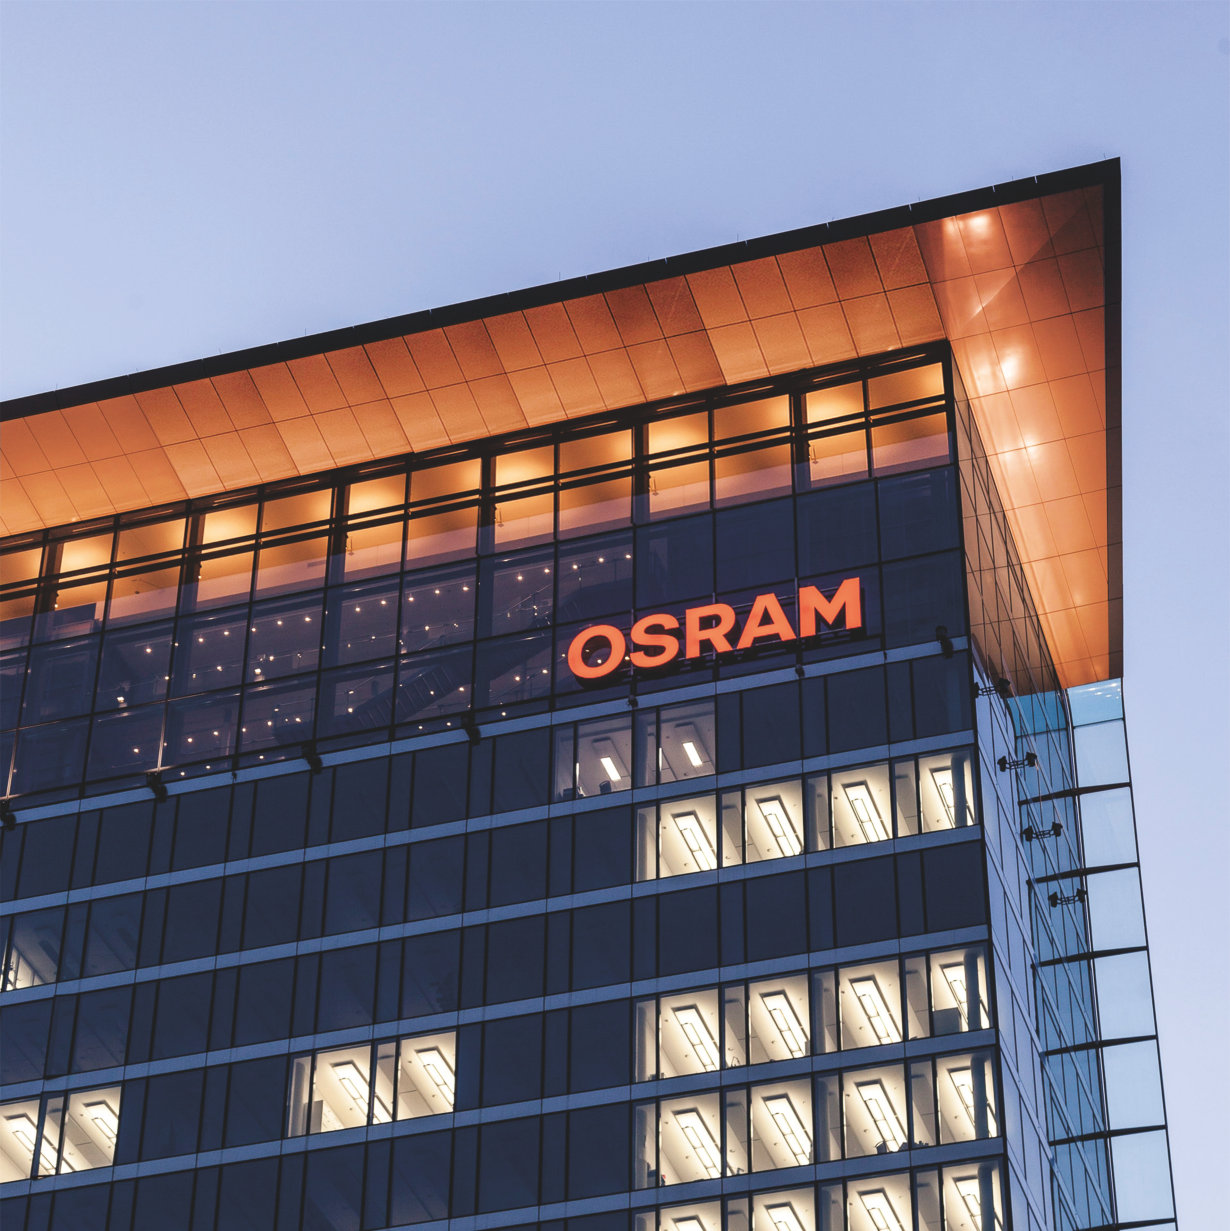 About OSRAM